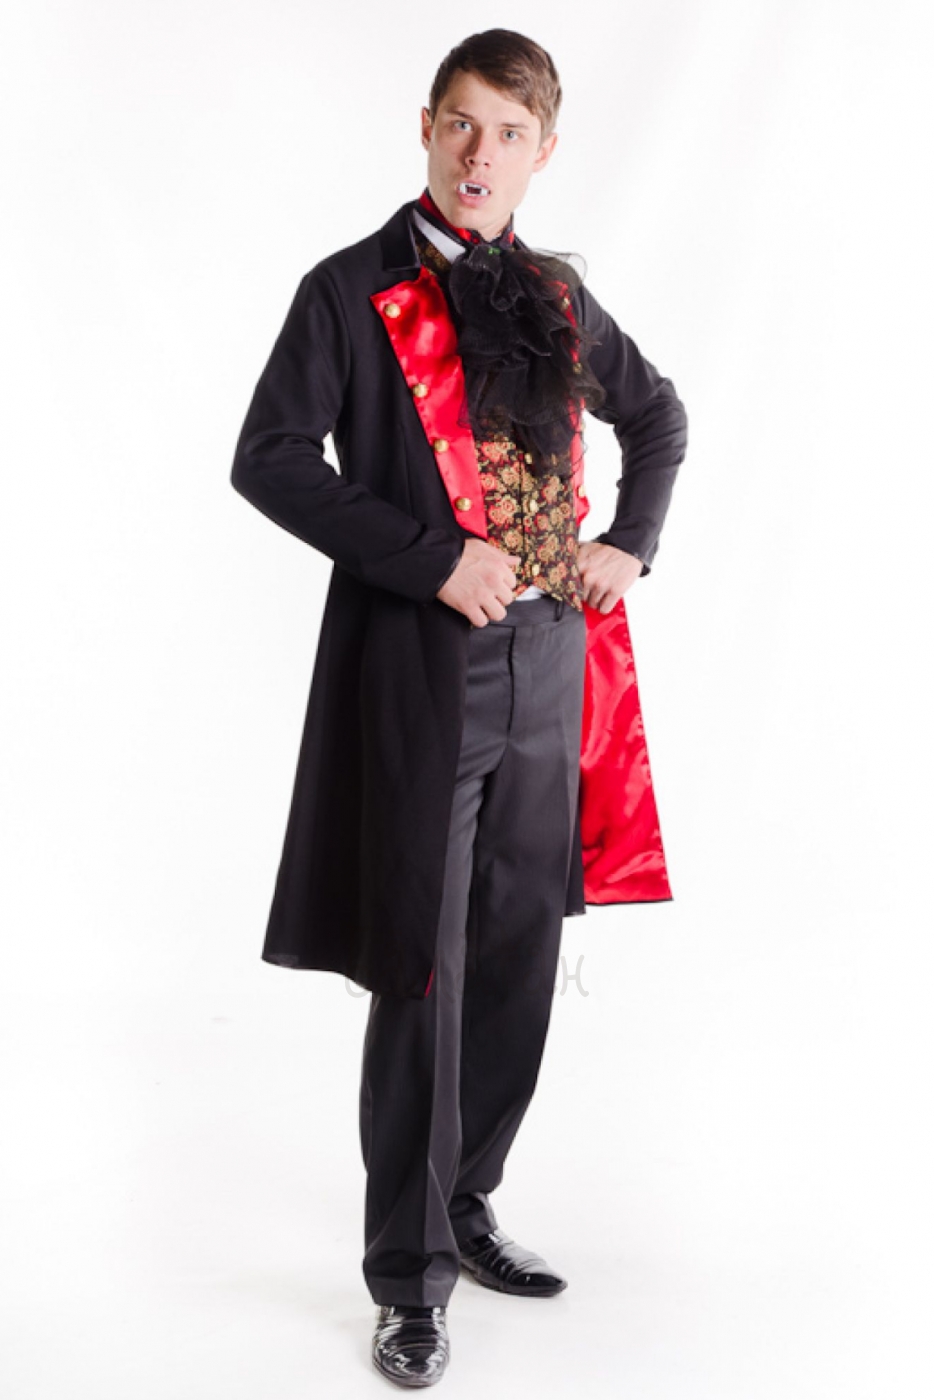 Count of Dracula Halloween costume for man